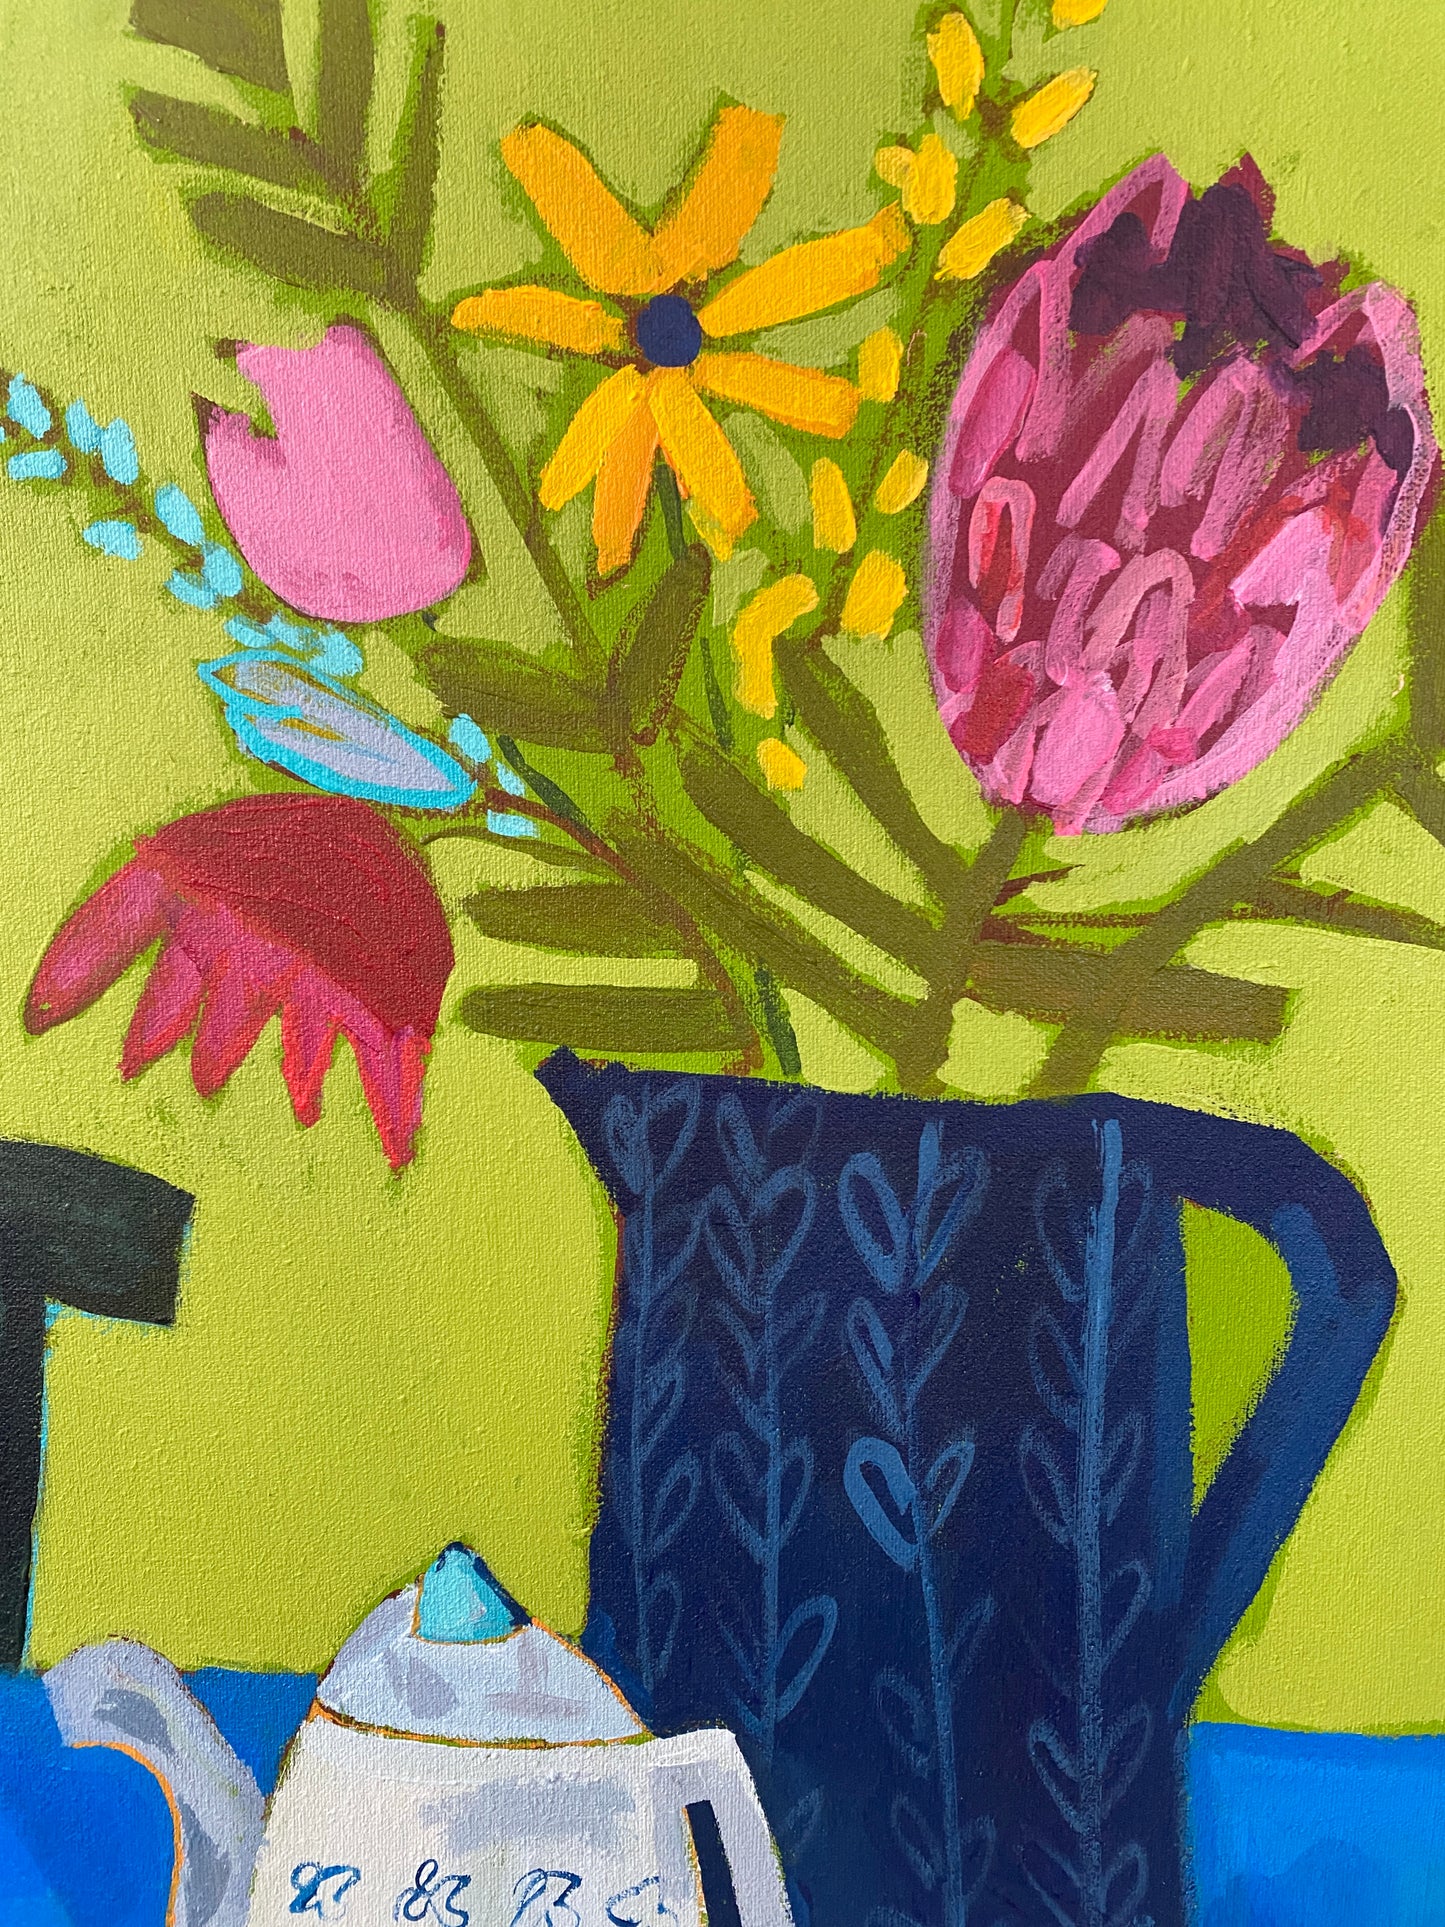 Original Wall Painting/ Afternoon Tea With Protea Flower/ 20”x24”